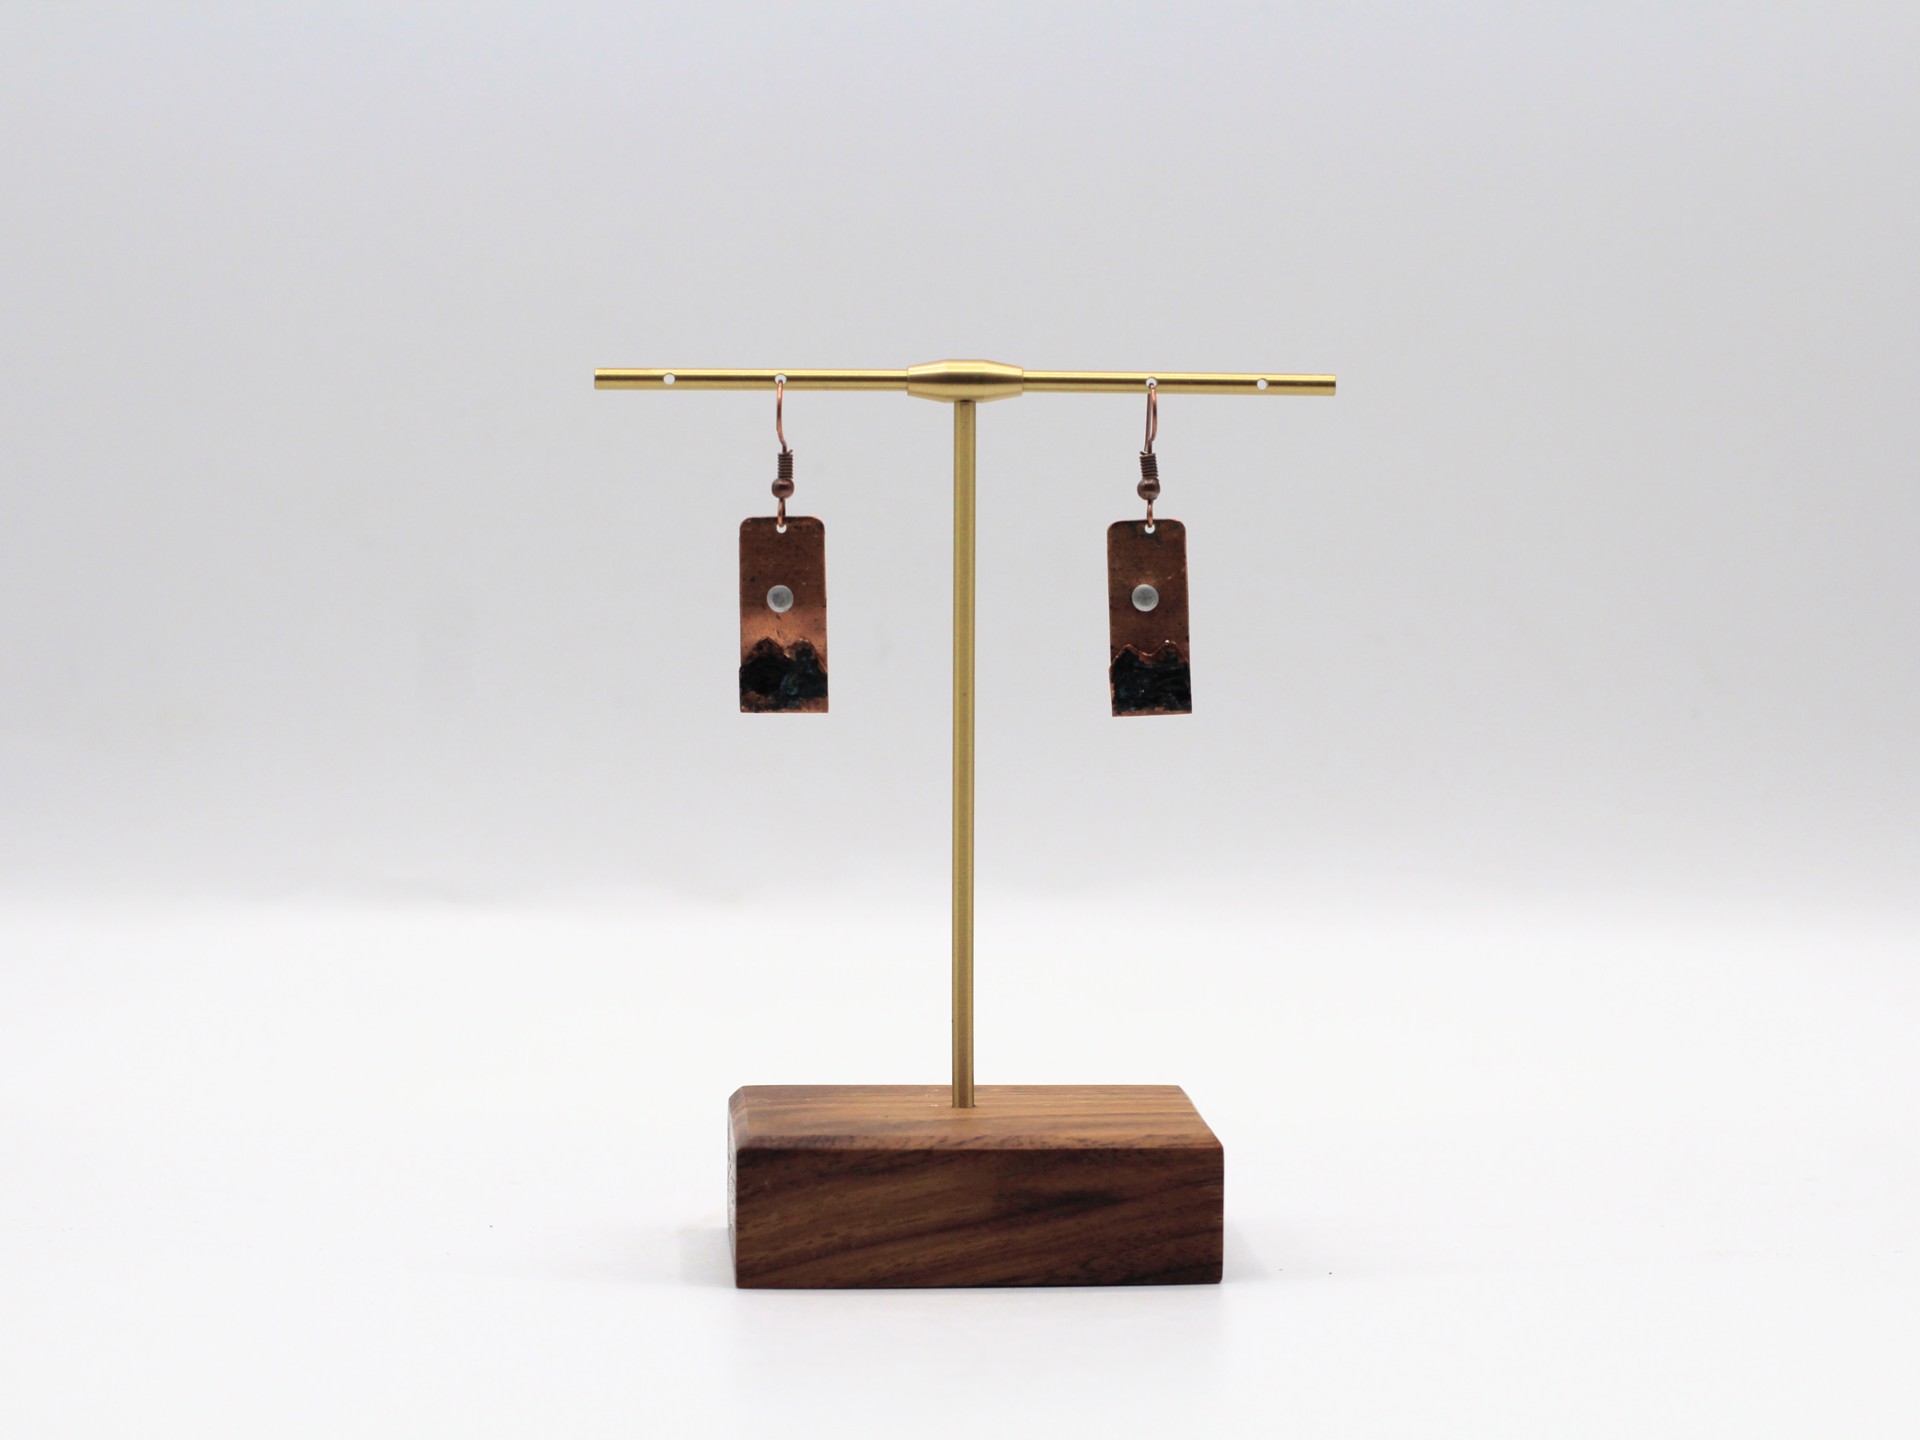 Mountain Earring by Kay Langland